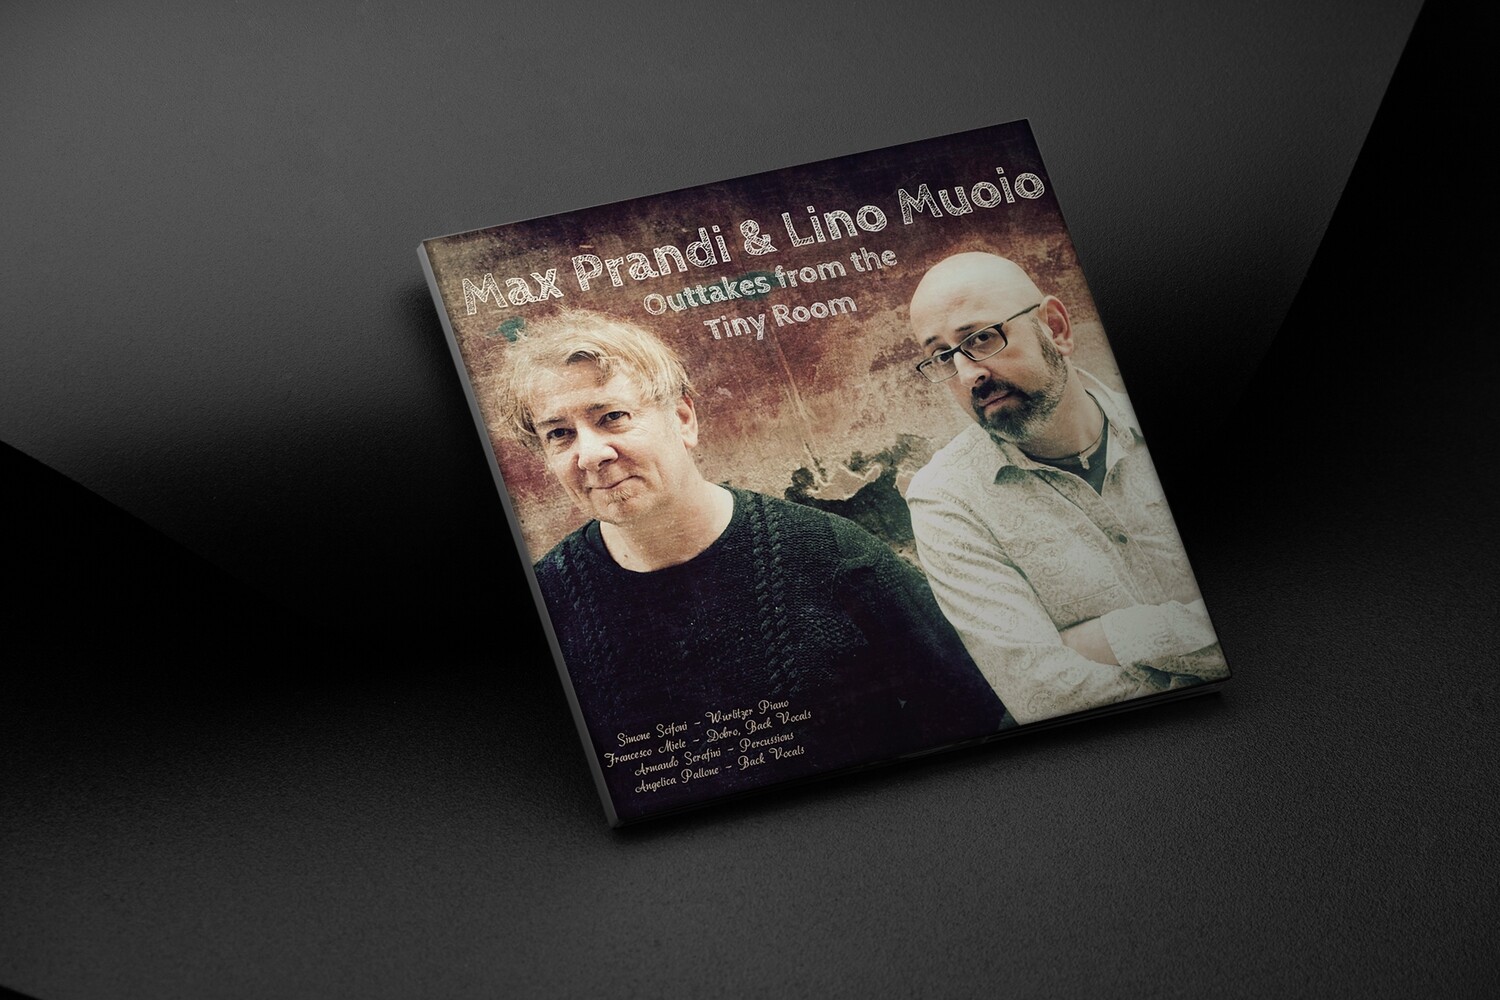 MAX PRANDI & LINO MUOIO - Outtakes from the Tiny Room (CD)